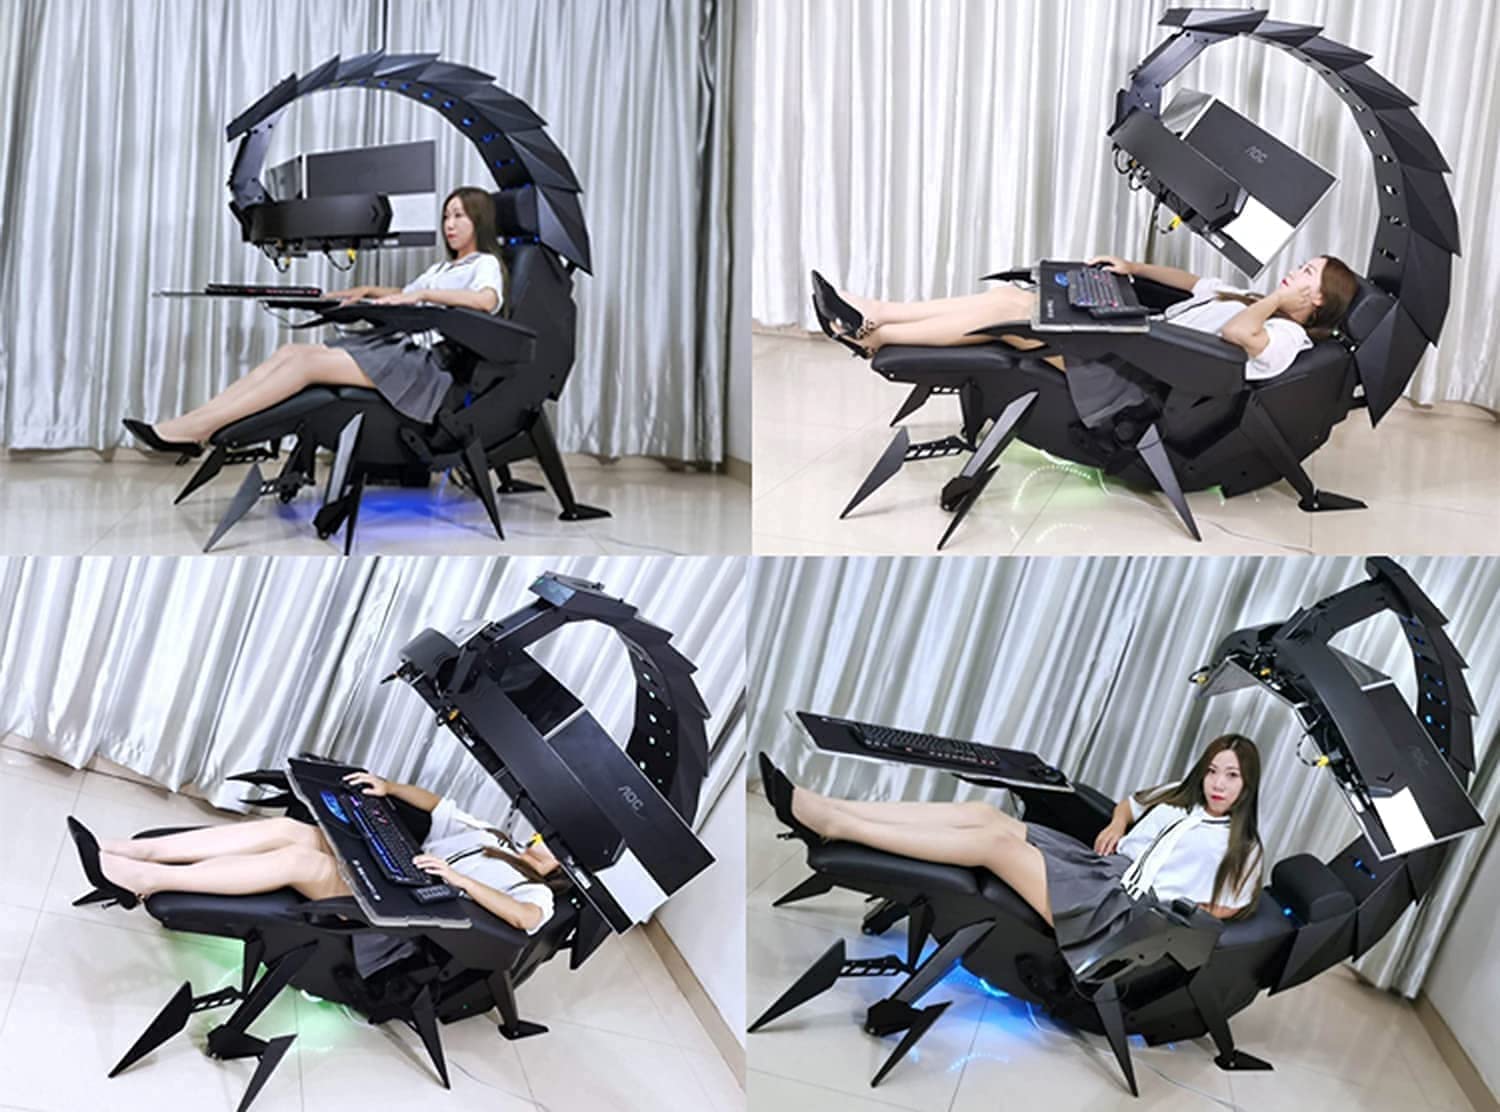 Gaming Chair Comfortable Luxury Gaming Chair Ergonomic Computer Cockpit Chair Comfortable Racing Simulator Game Chair with Hanging 3 Screens C - Game-Savvy